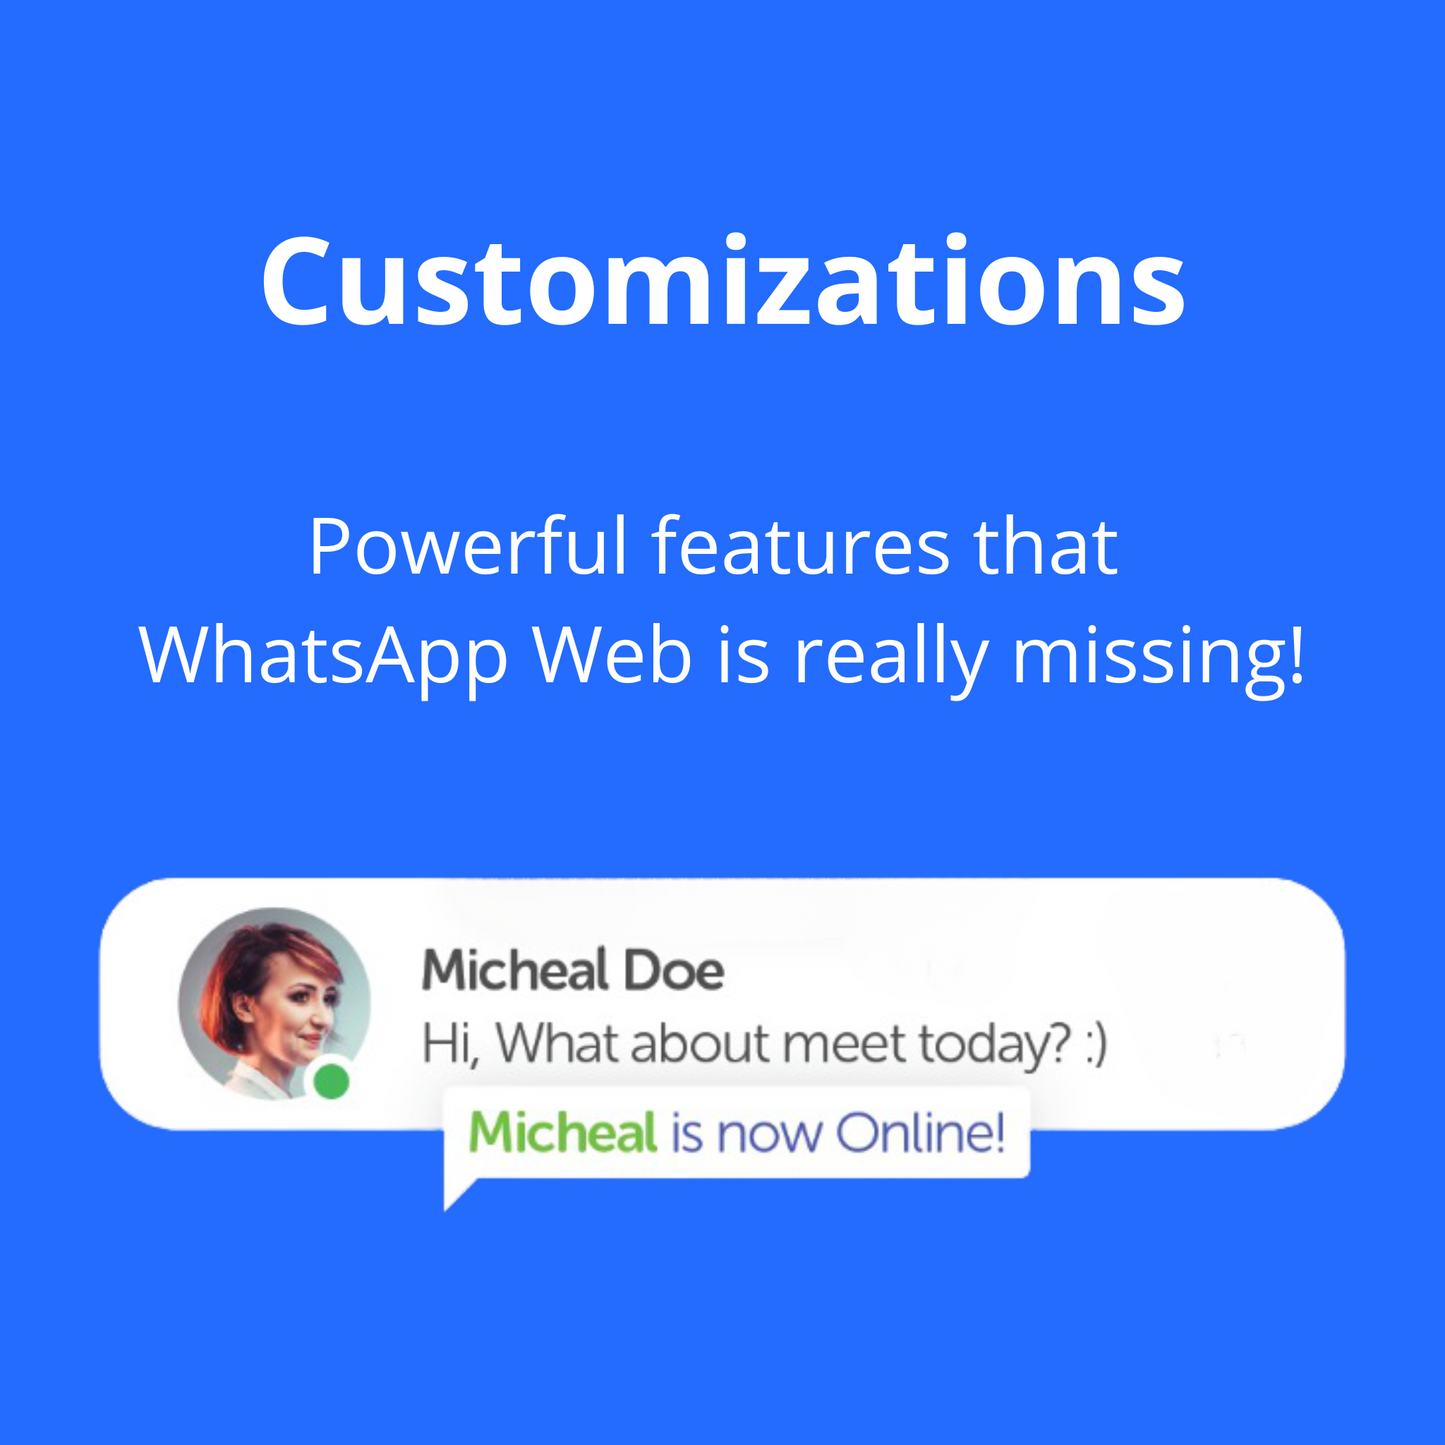 WA Web Plus (3 Months Plan) - Automate your WhatsApp tasks by Golden Value SG is really missing powerful features Whatsapp web.